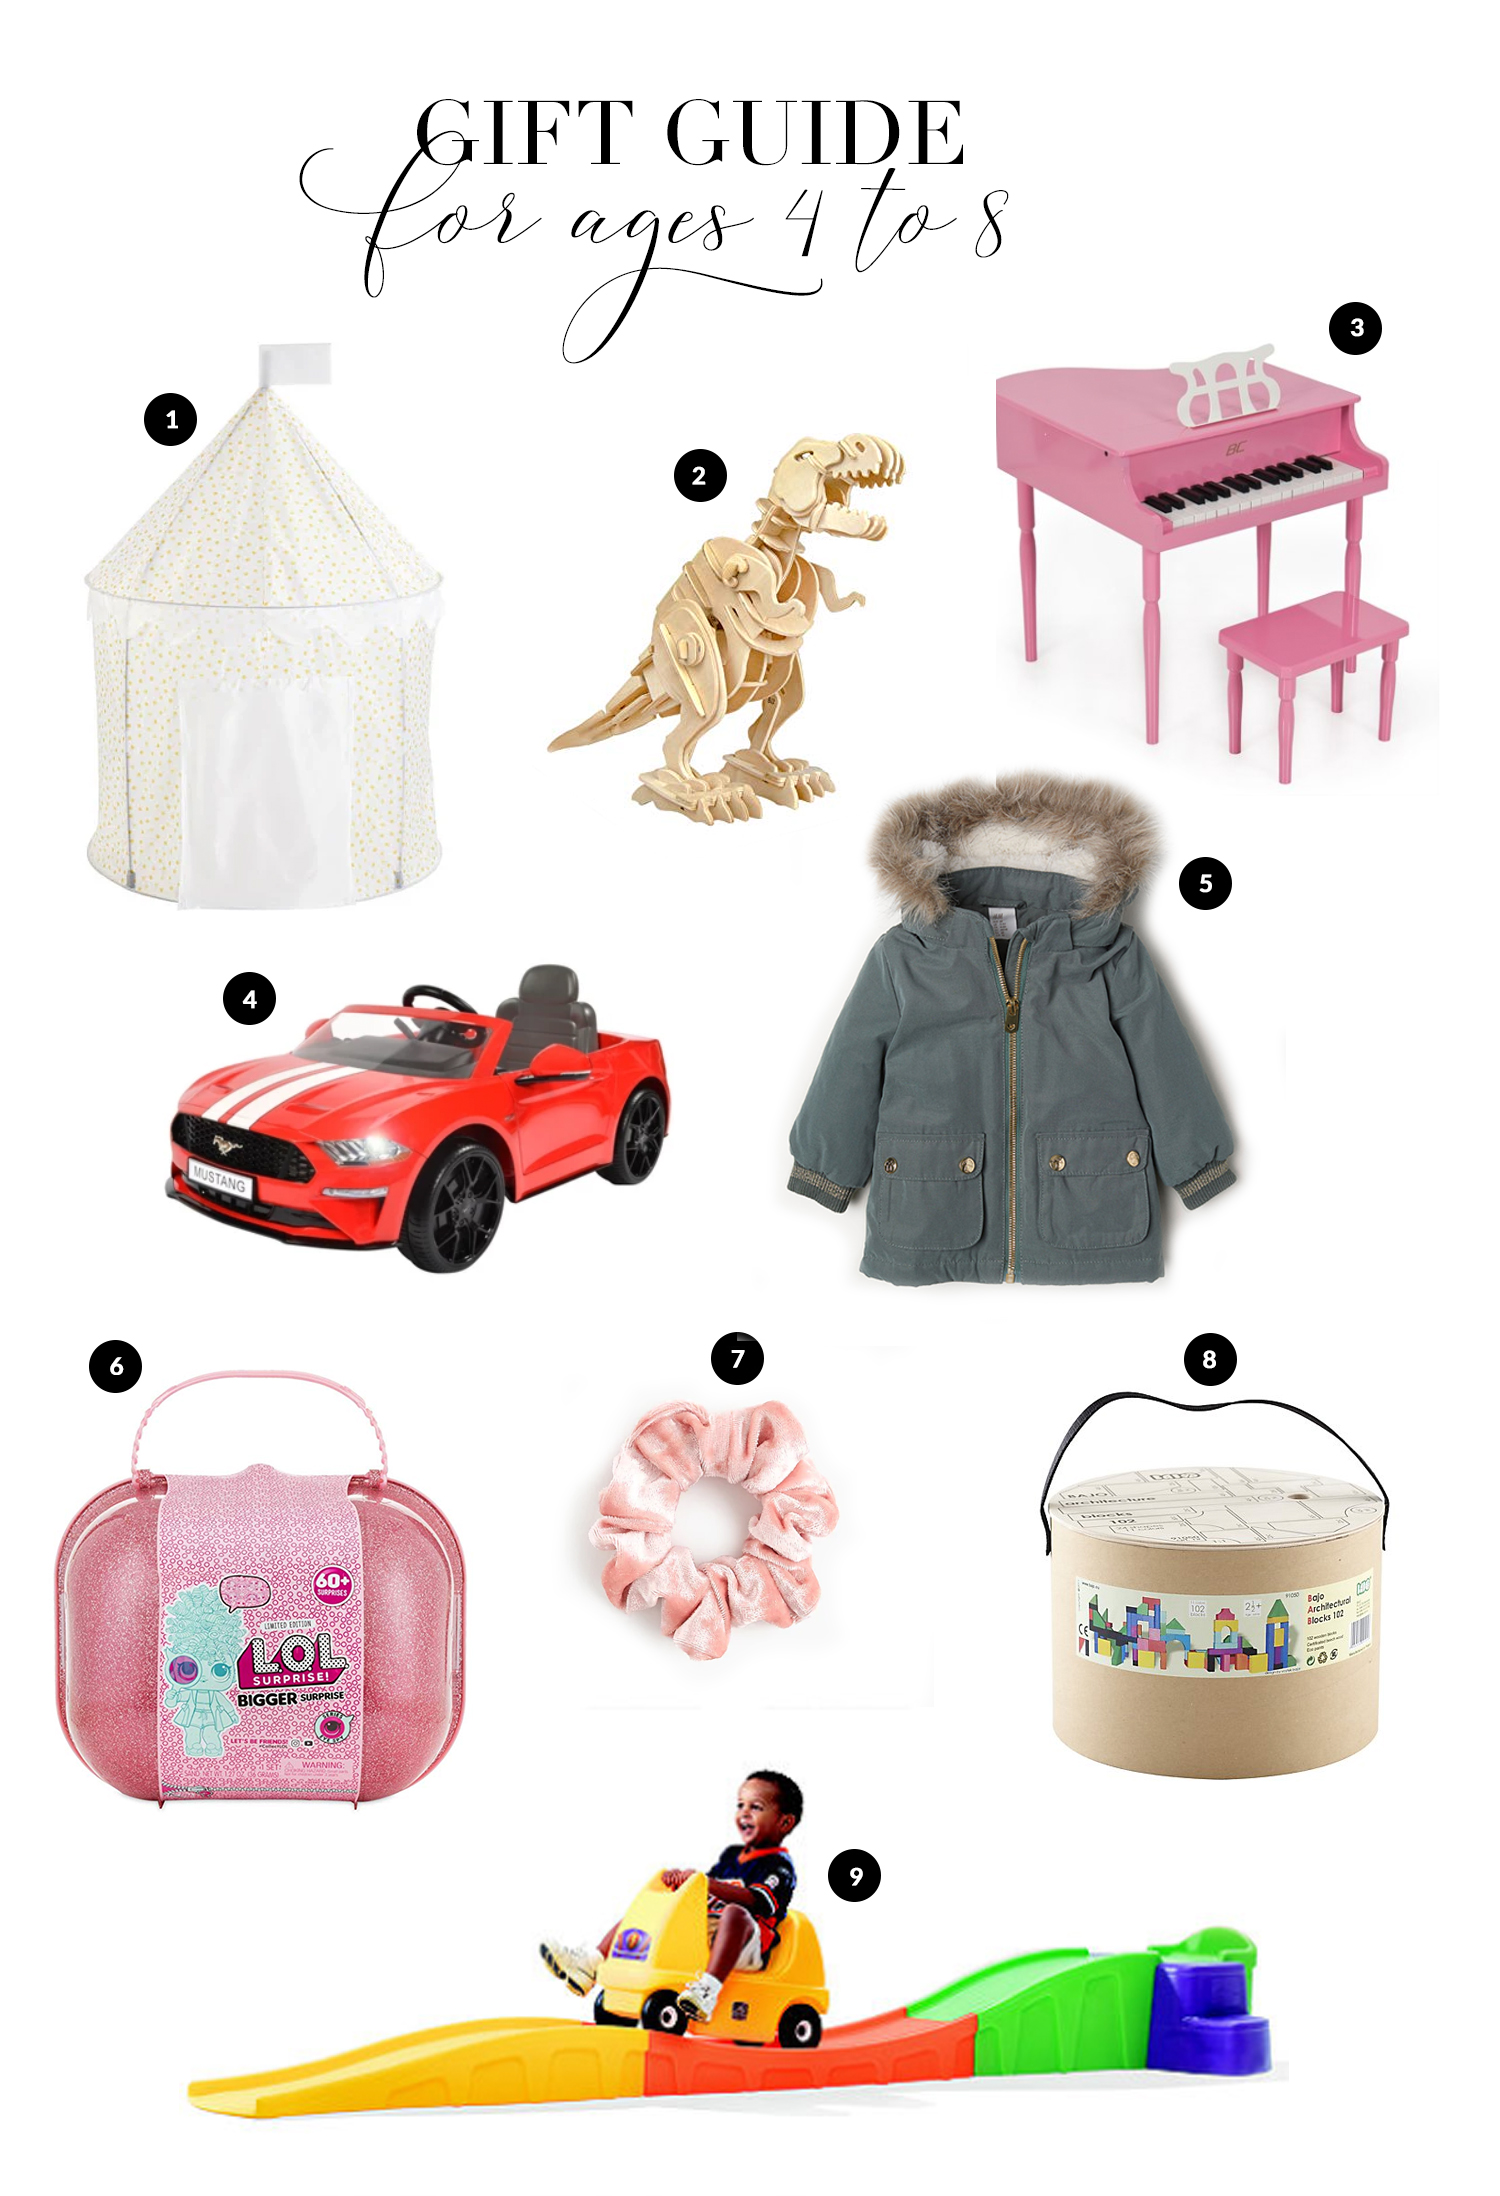 Gift Guide for the Kids with Haus of Layne. Our top ideas for all the ages! Catch the ideas now! #GiftGuide2018 #GiftGuides2018 #GiftGuideForTheKids #GiftGuideForKids #GiftIdeasForKids #GiftIdeasForKids